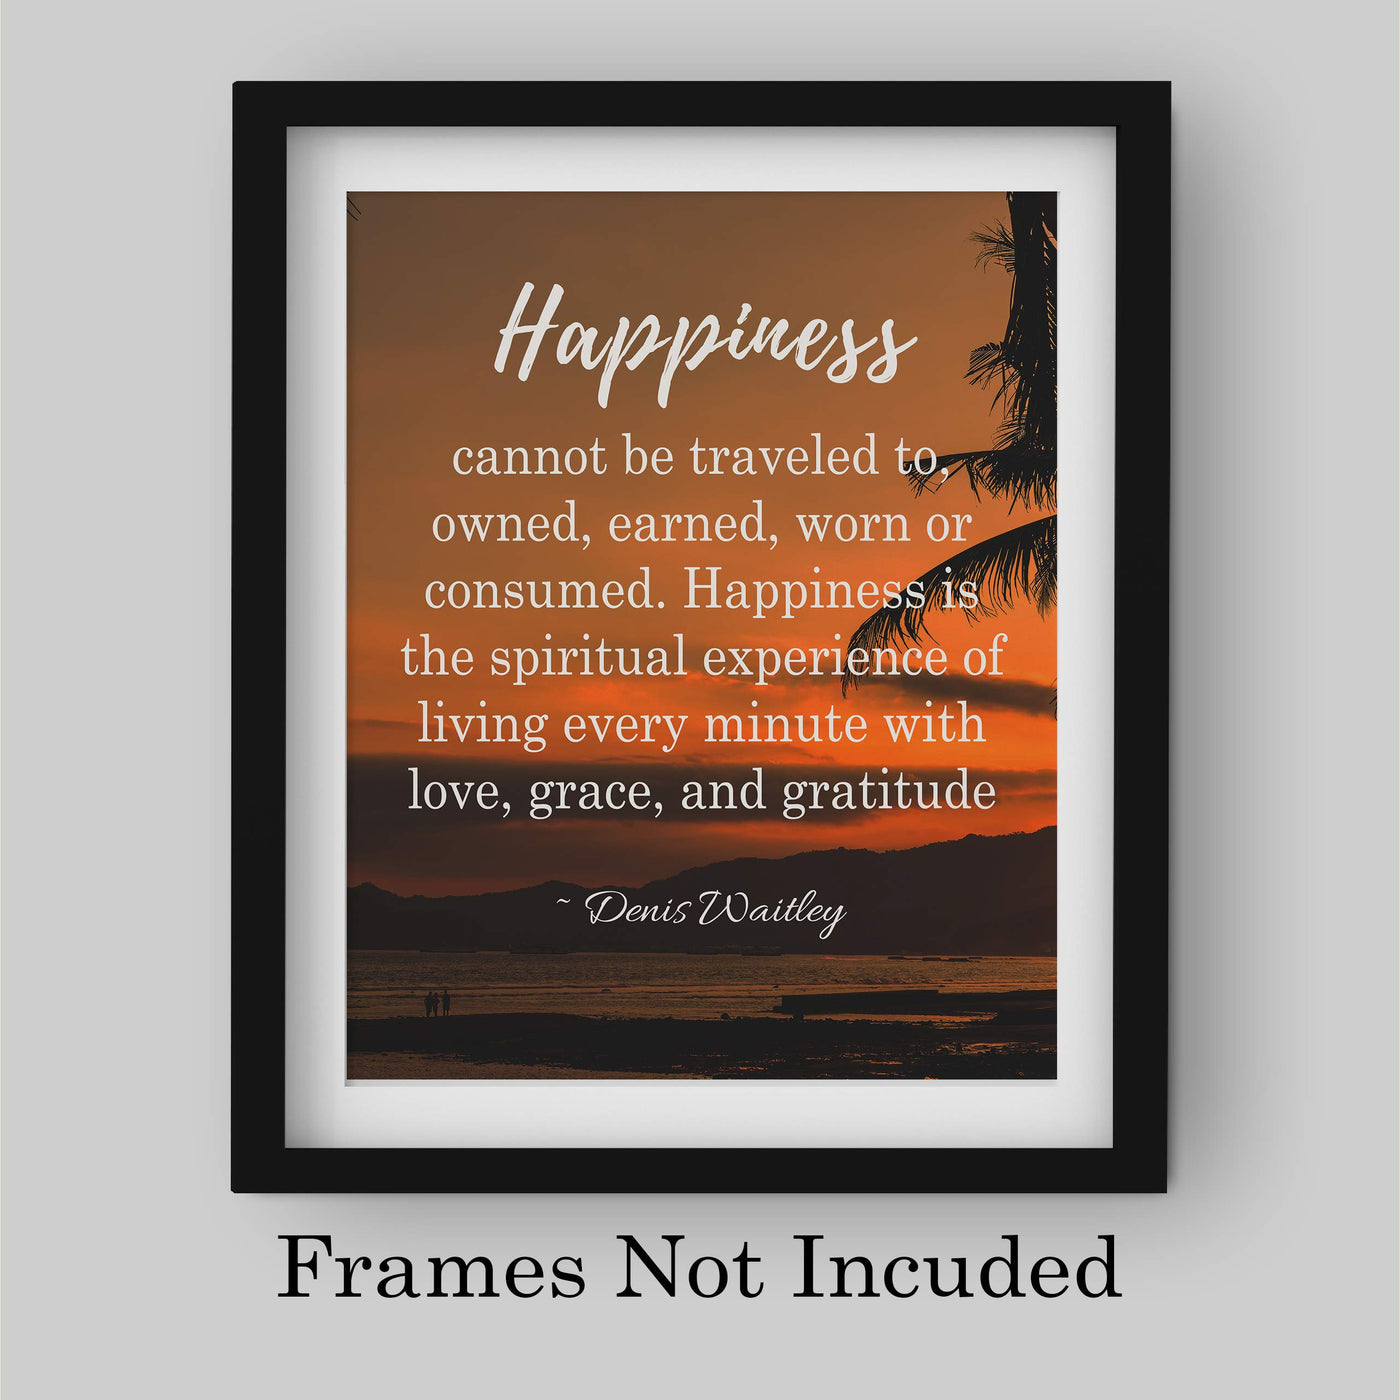 Happiness is Living With Love, Grace & Gratitude- Inspirational Wall Art-8 x 10" Print Wall Print-Ready to Frame. Modern Spiritual Typographic Decor for Home-Office-Studio. Dennis Waitley Quotes.